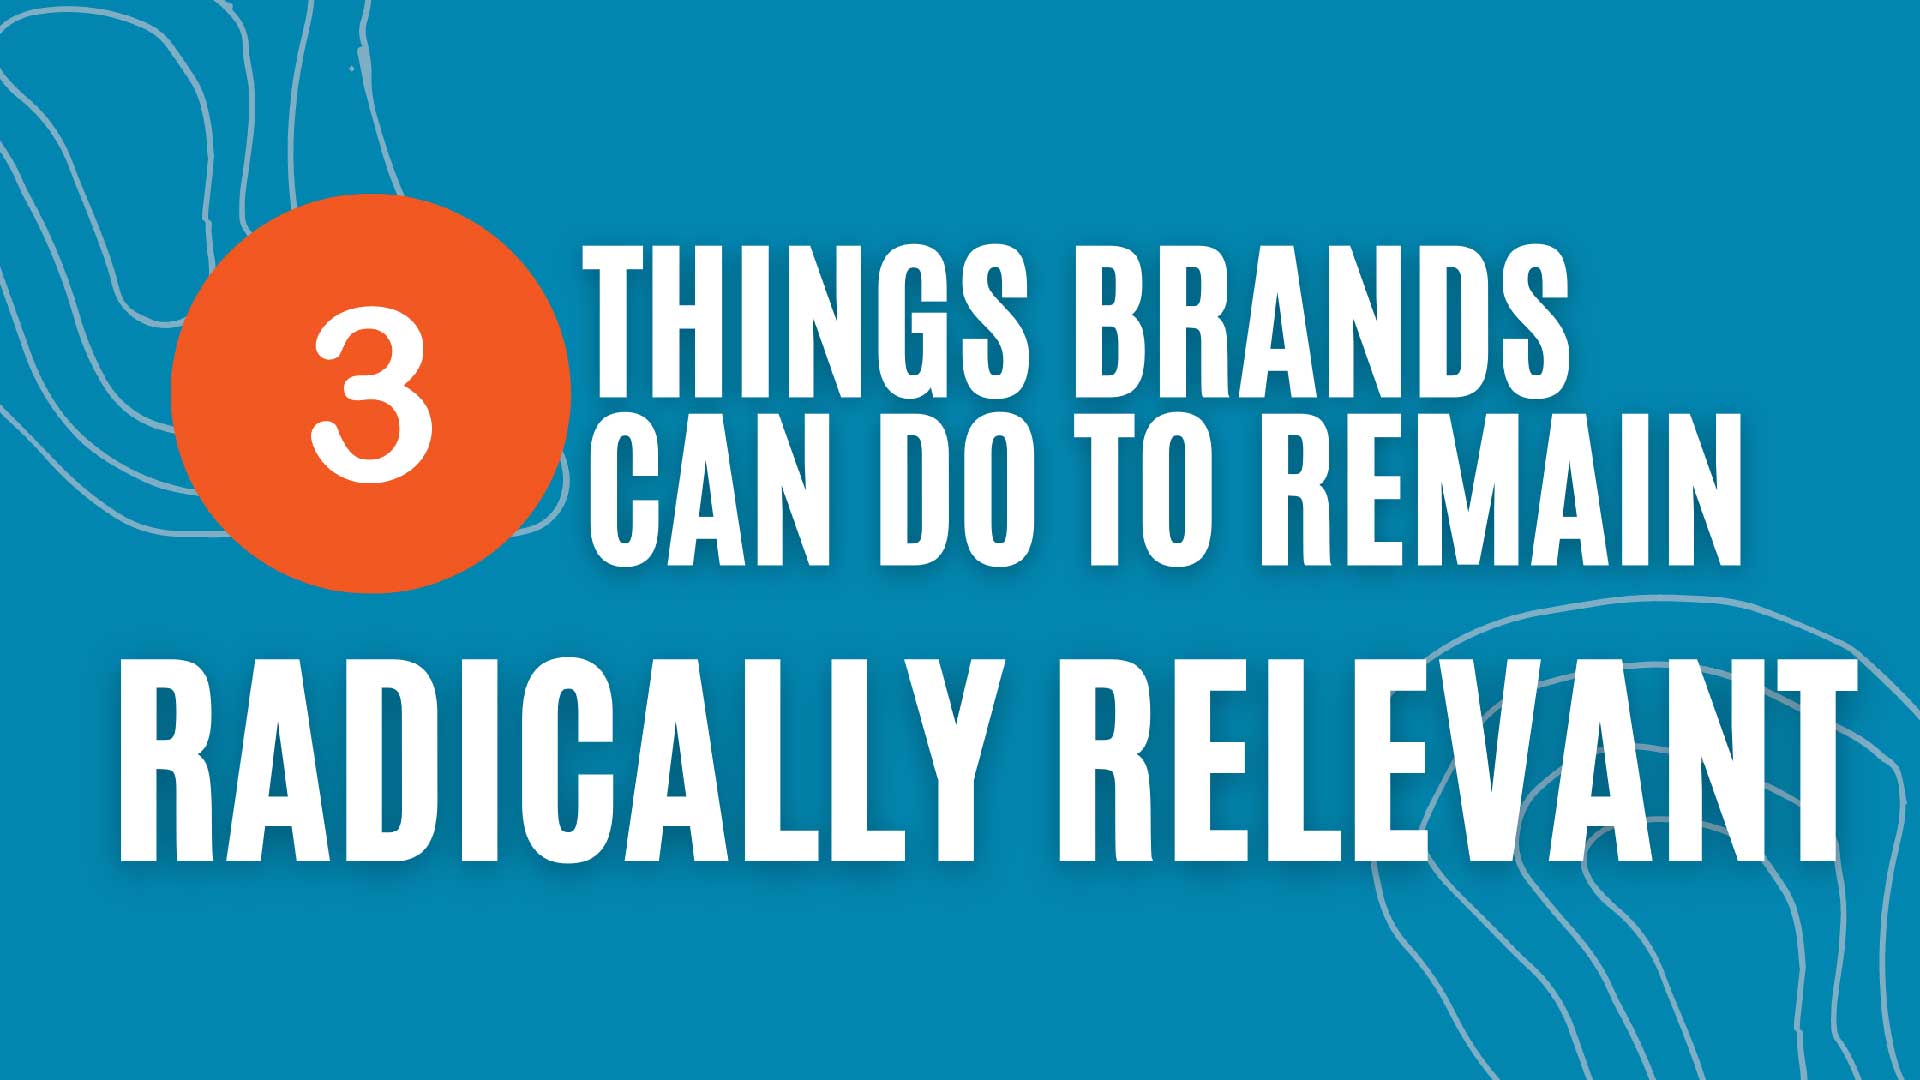 Brand Relevance in Three Steps